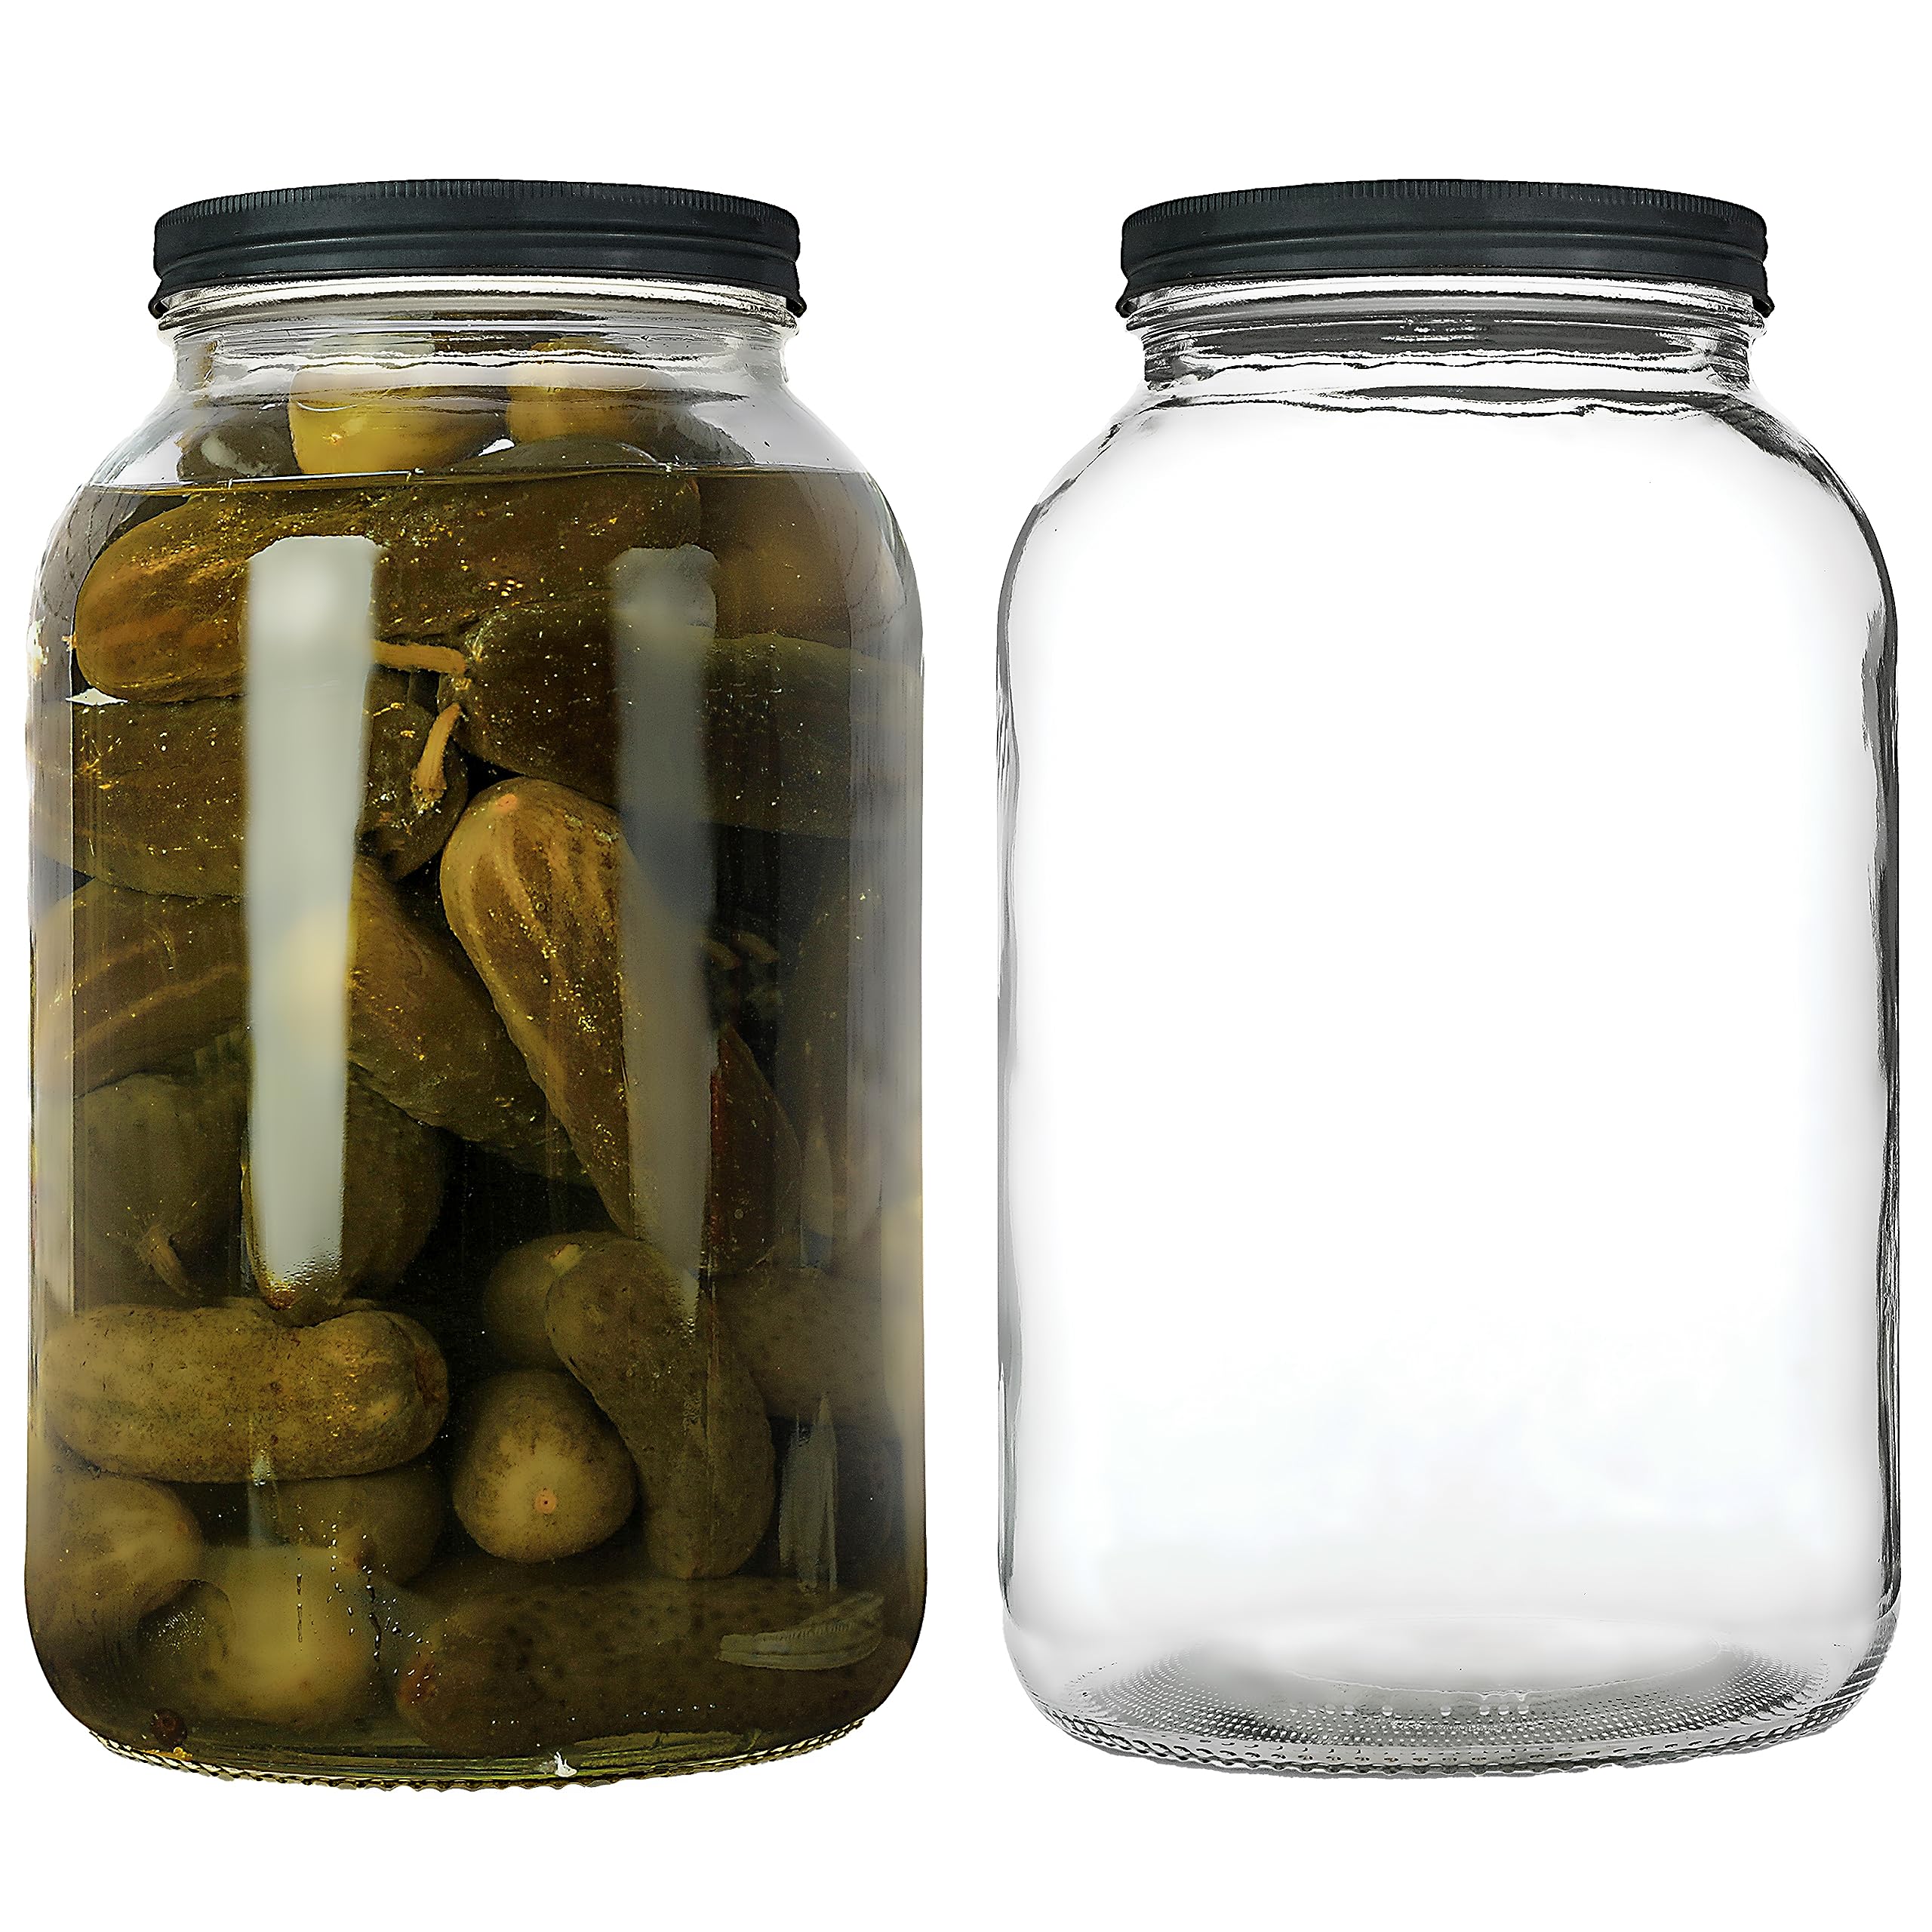 kitchentoolz 1 Gallon Glass Jar with Lid - Large Mason Jar Wide Mouth- Pickling, Storing, Brewing and Fermenting  - Like New